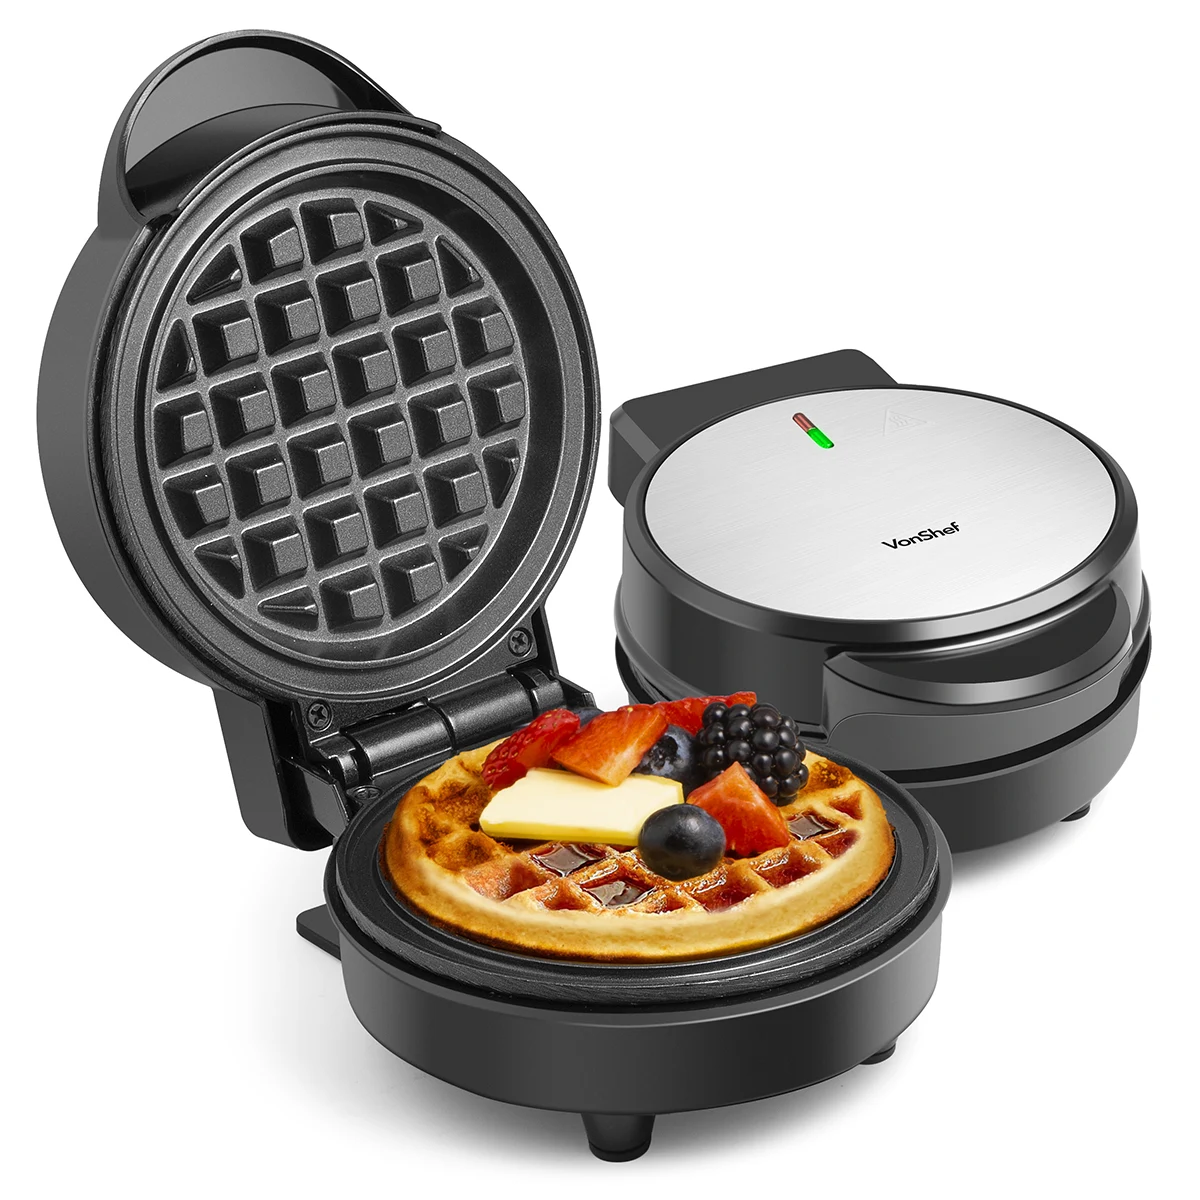 Capturing High Quality Images of Waffle Maker on a White Background